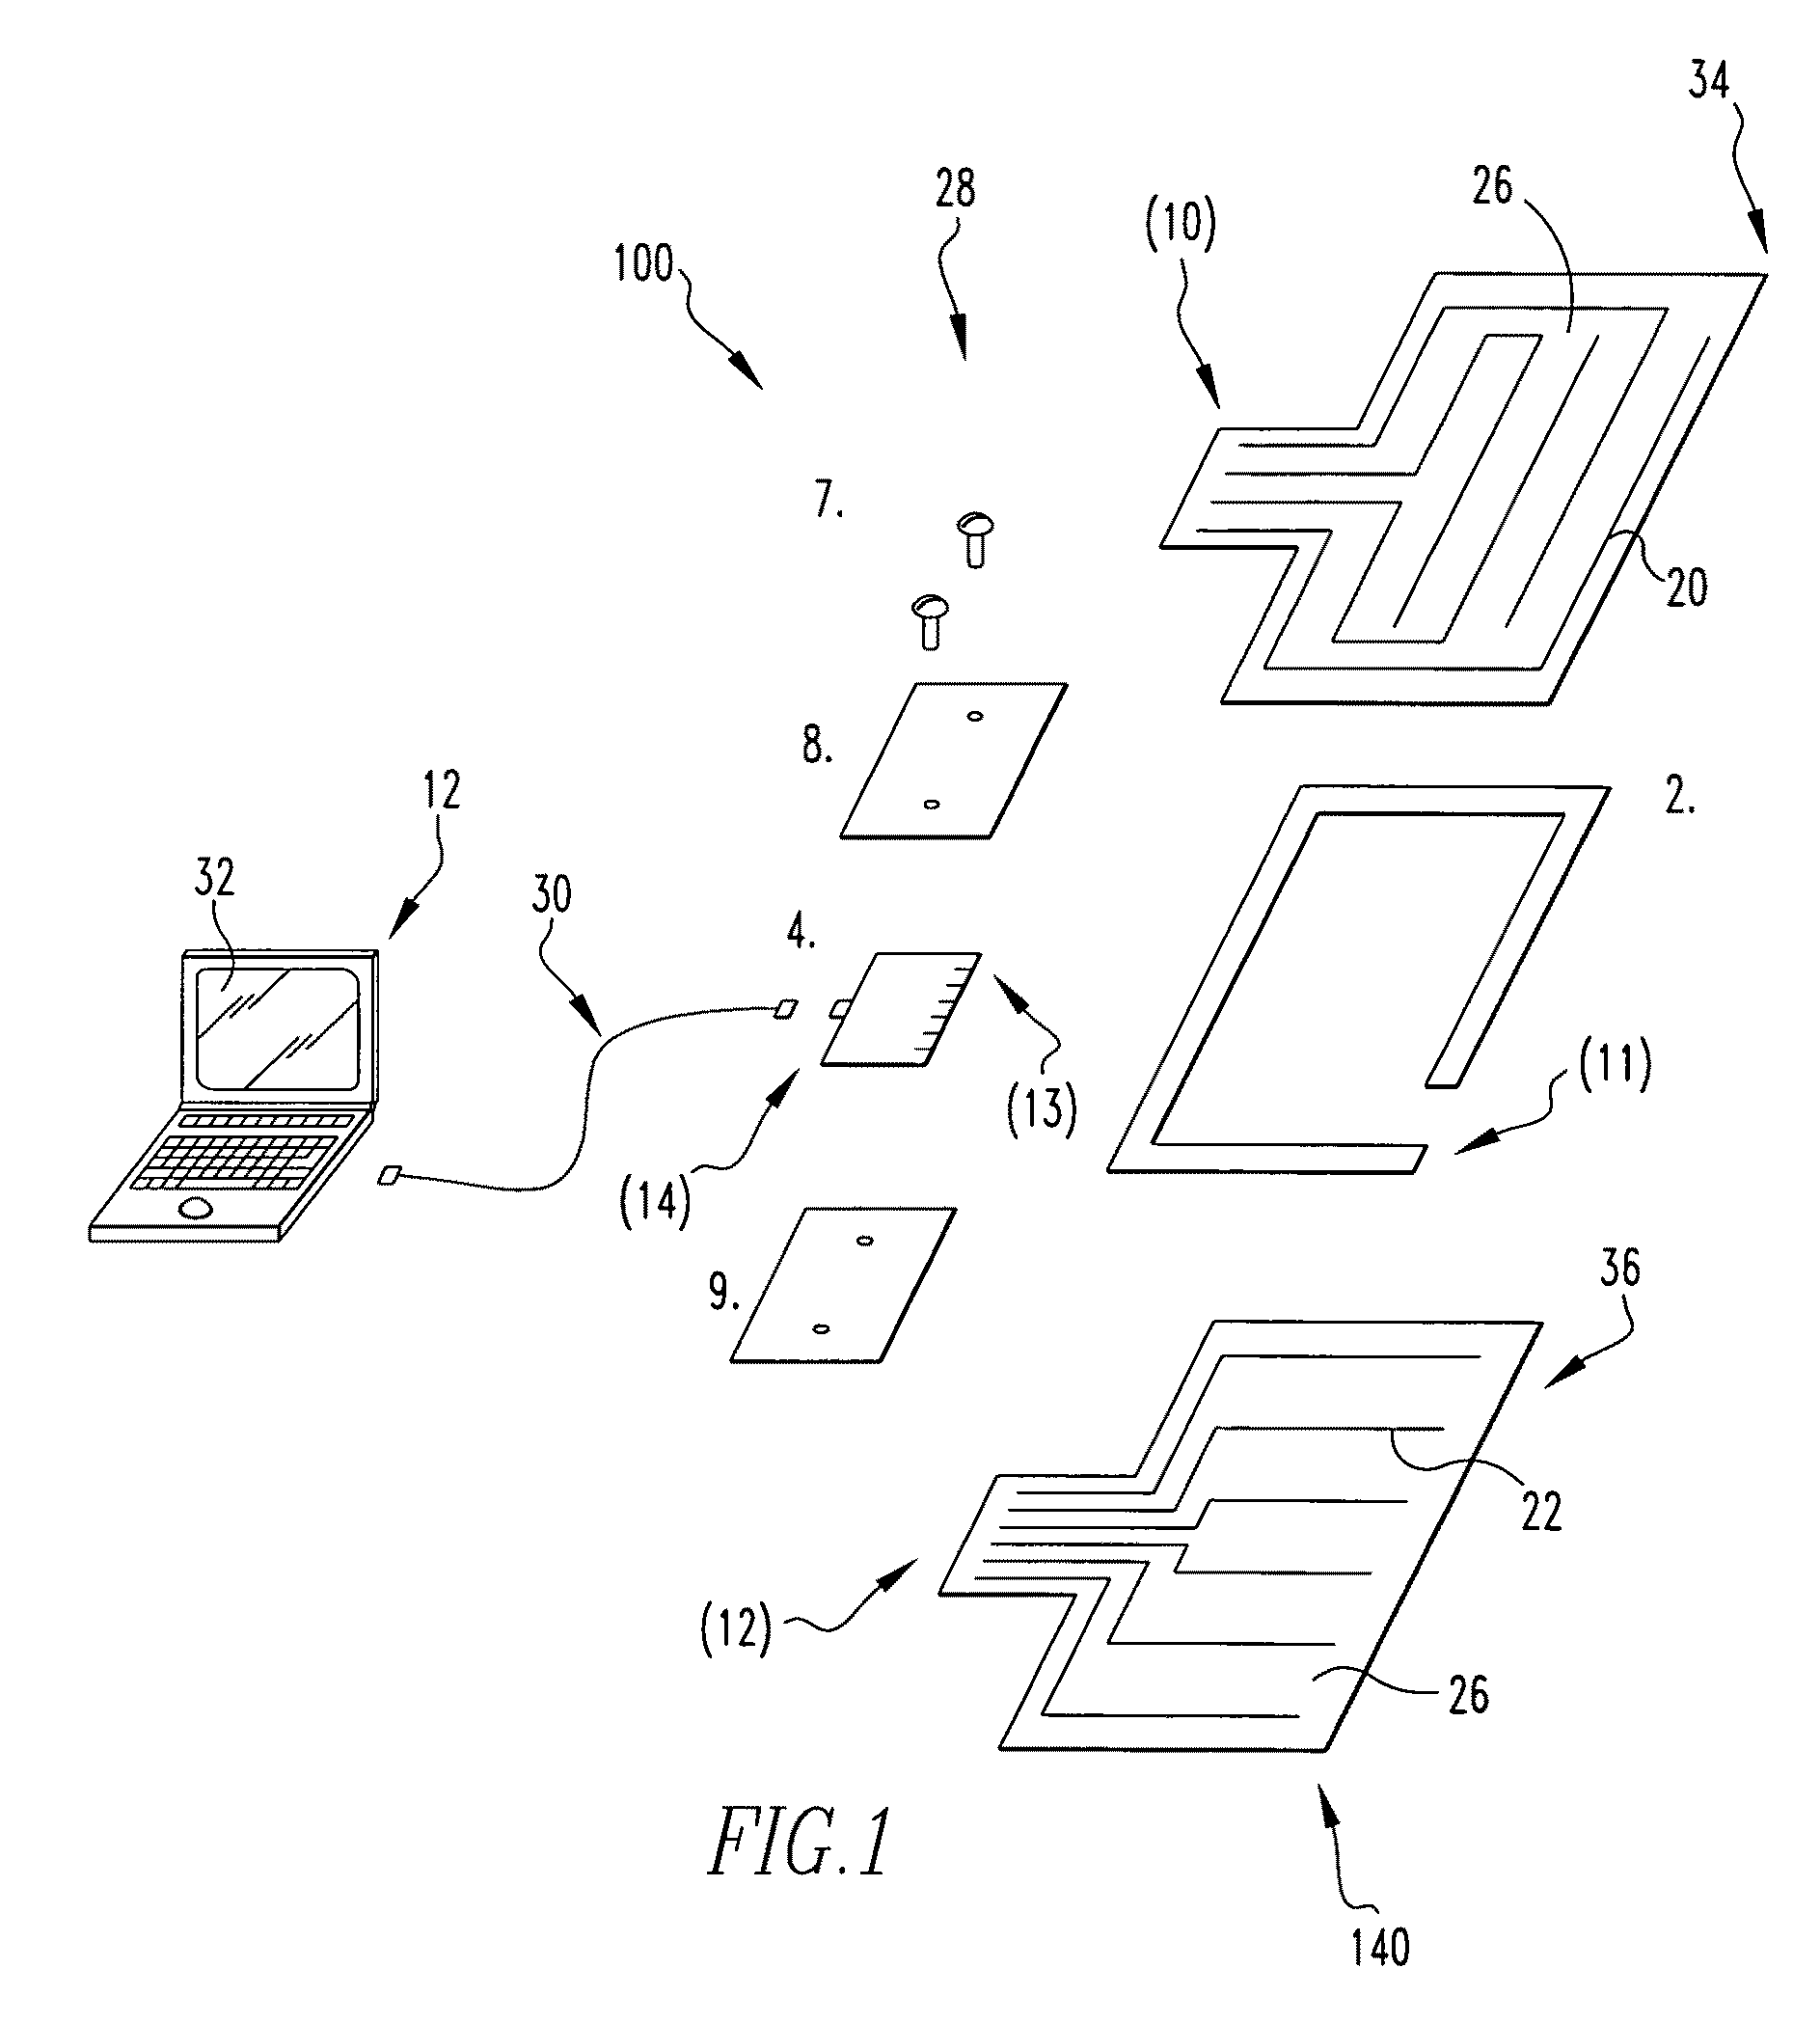 Method and apparatus for providing input to a processor, and a sensor pad